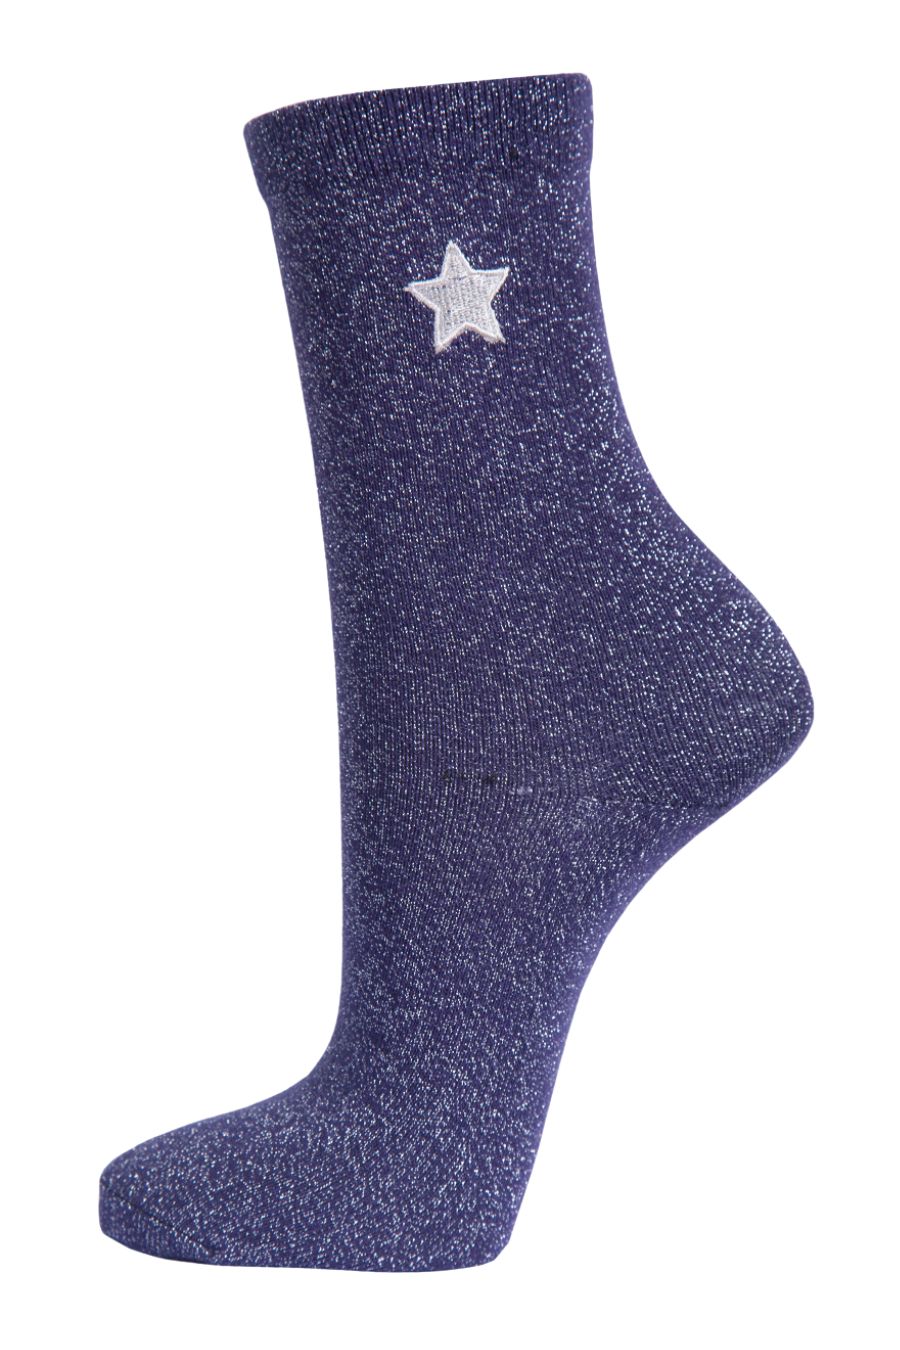 navy blue and silver glitter socks with an embroidered star on the ankle